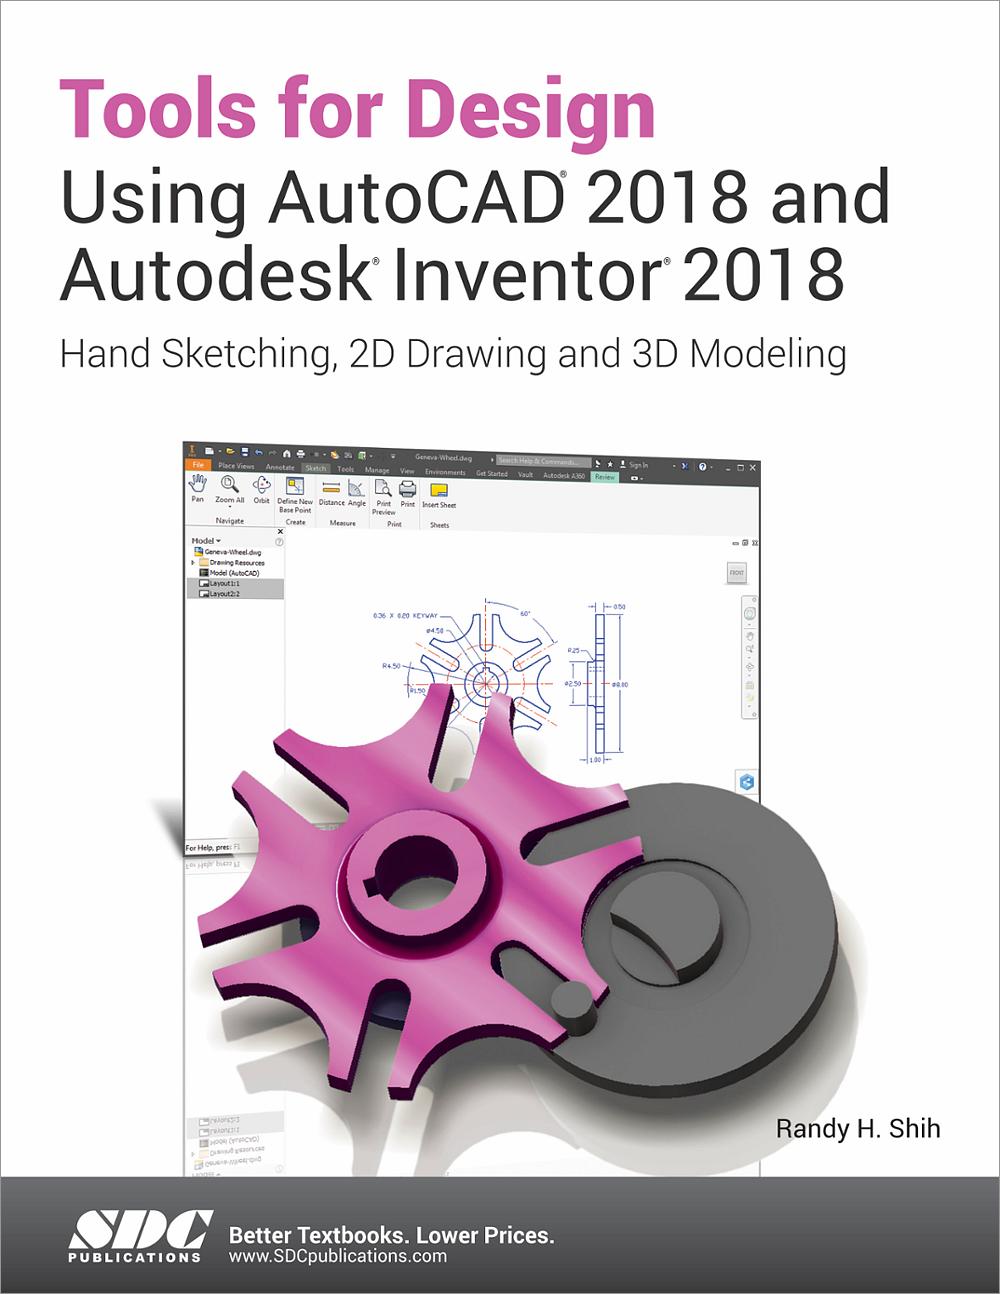 learning autodesk inventor